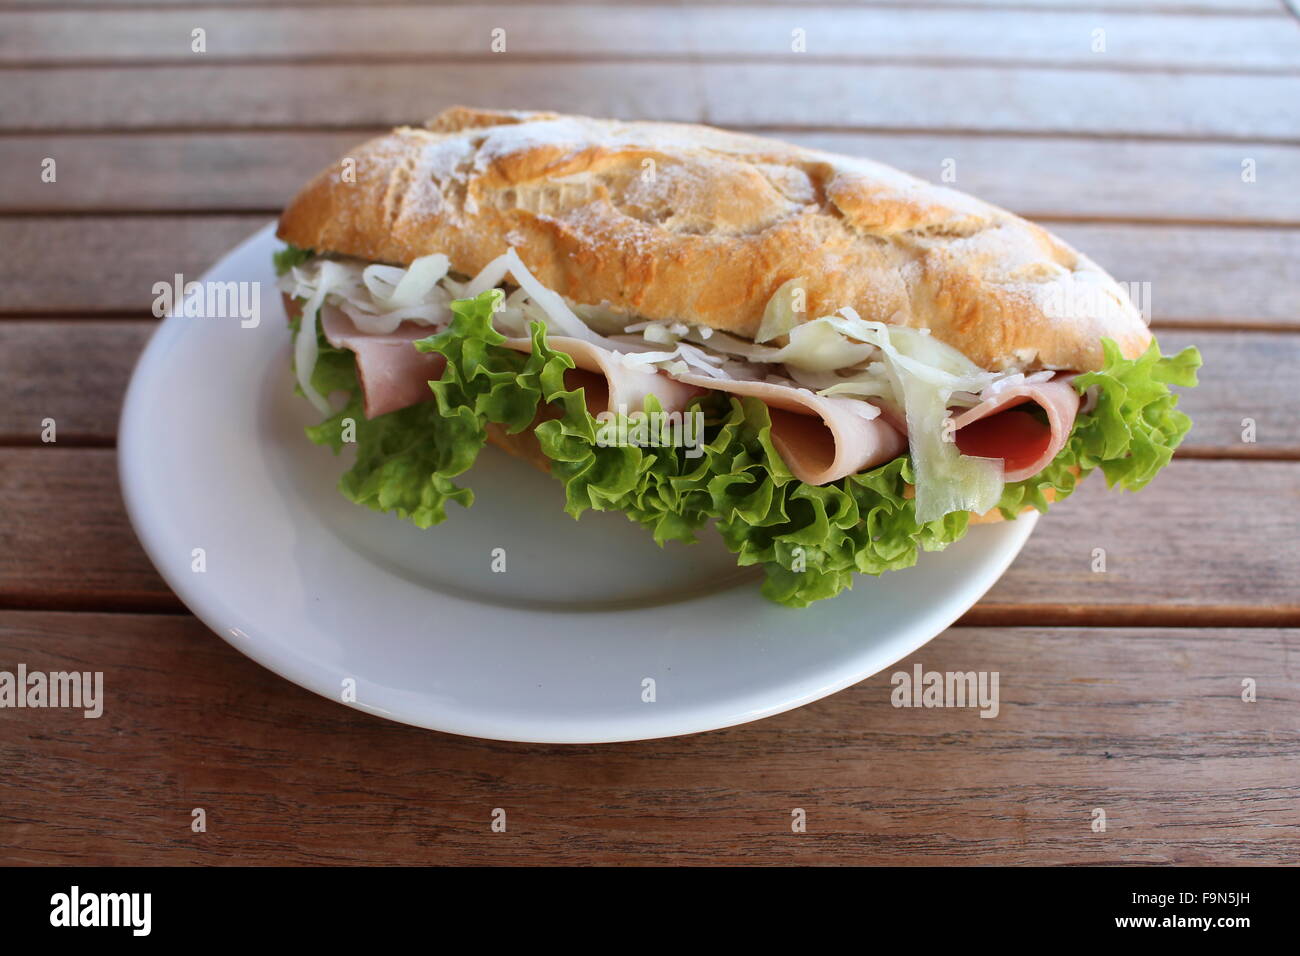 Baguette with ham and salad Stock Photo